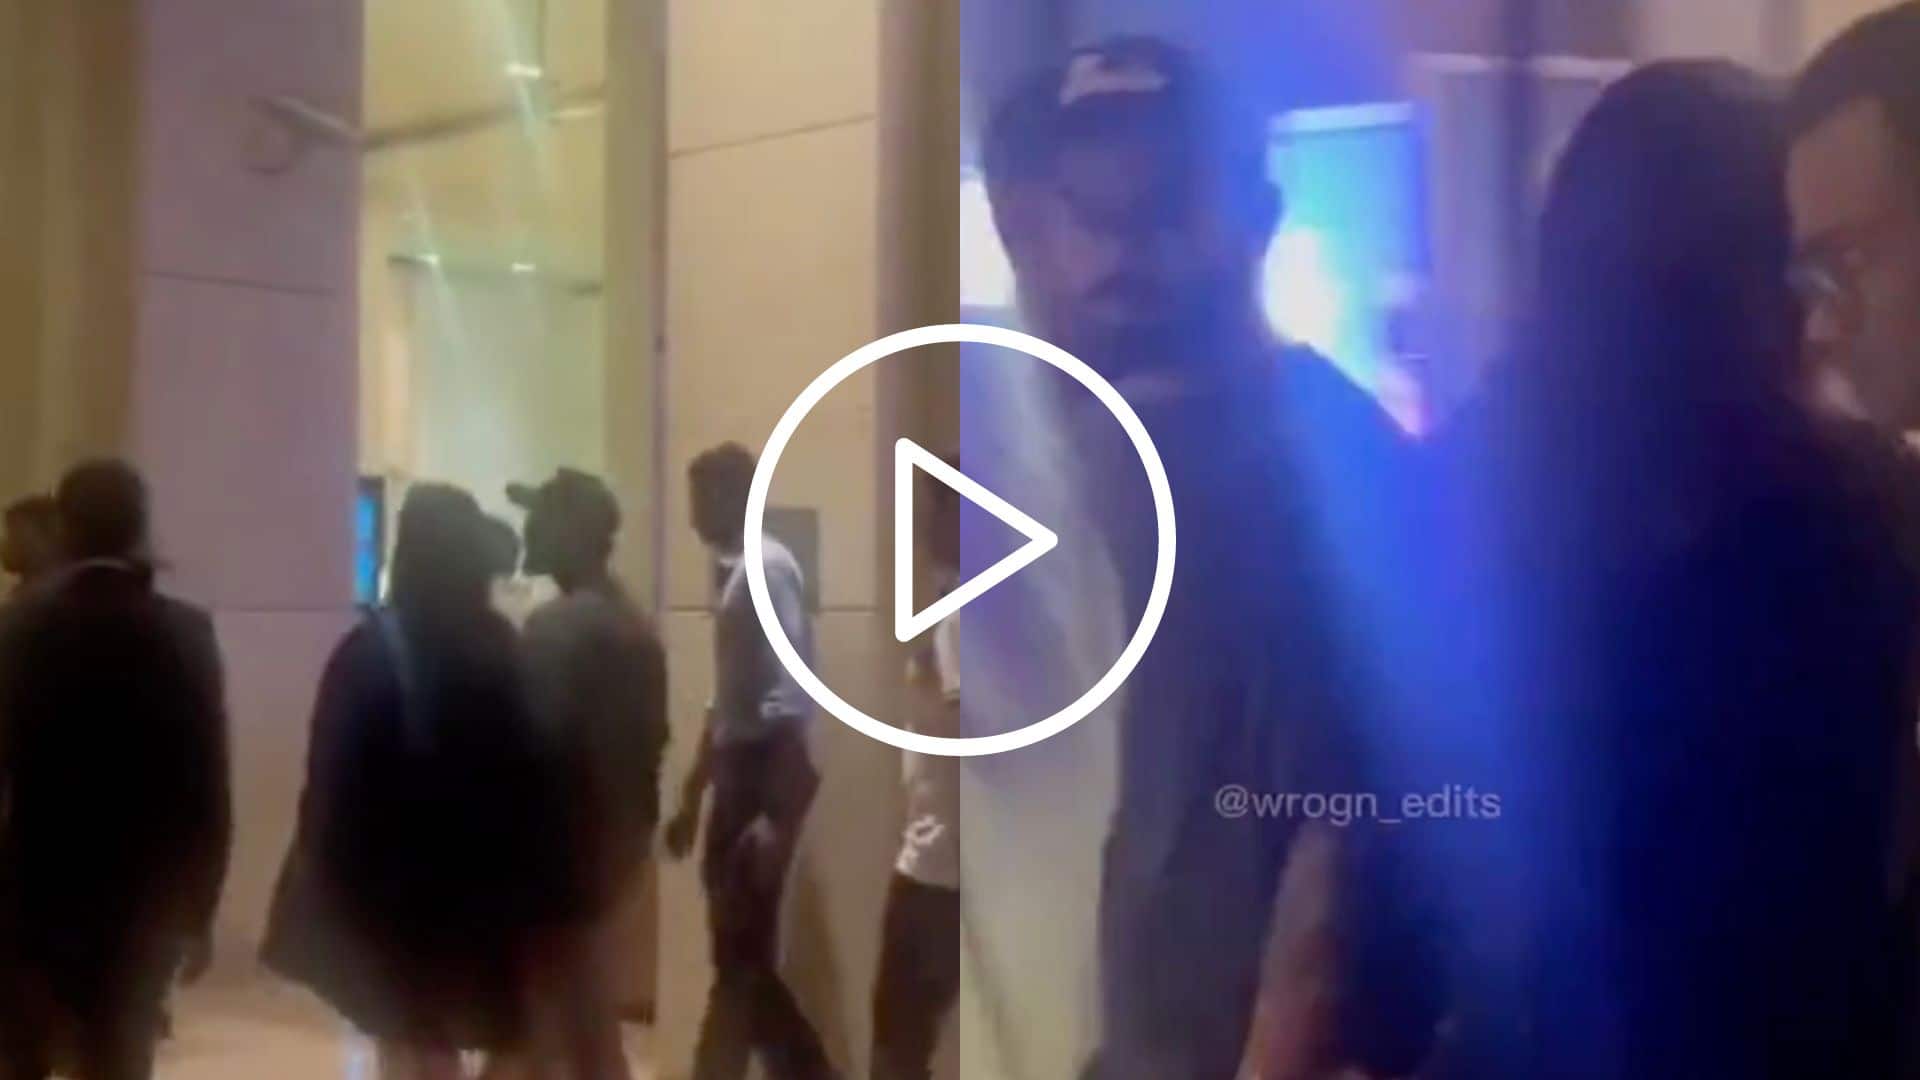 [Watch] Virat and Anushka Share Heartwarming Moment At the Team's Hotel